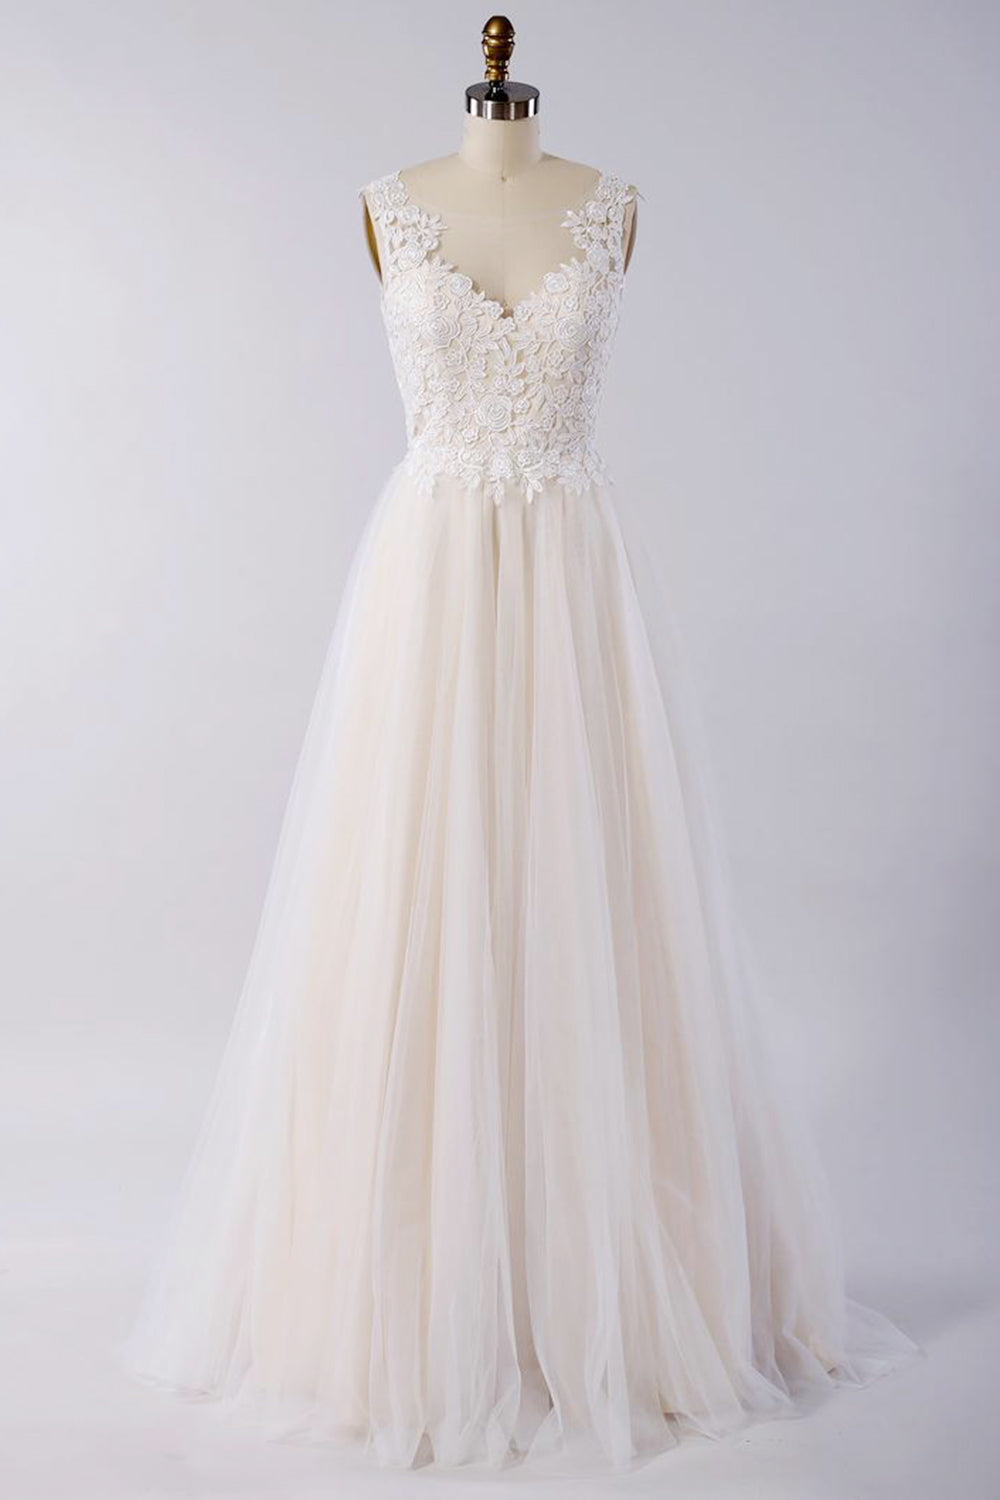 Stylish V-neck Straps Tulle Wedding Dress Appliques A-line Ruffles Bridal Gowns On Sale-27dress